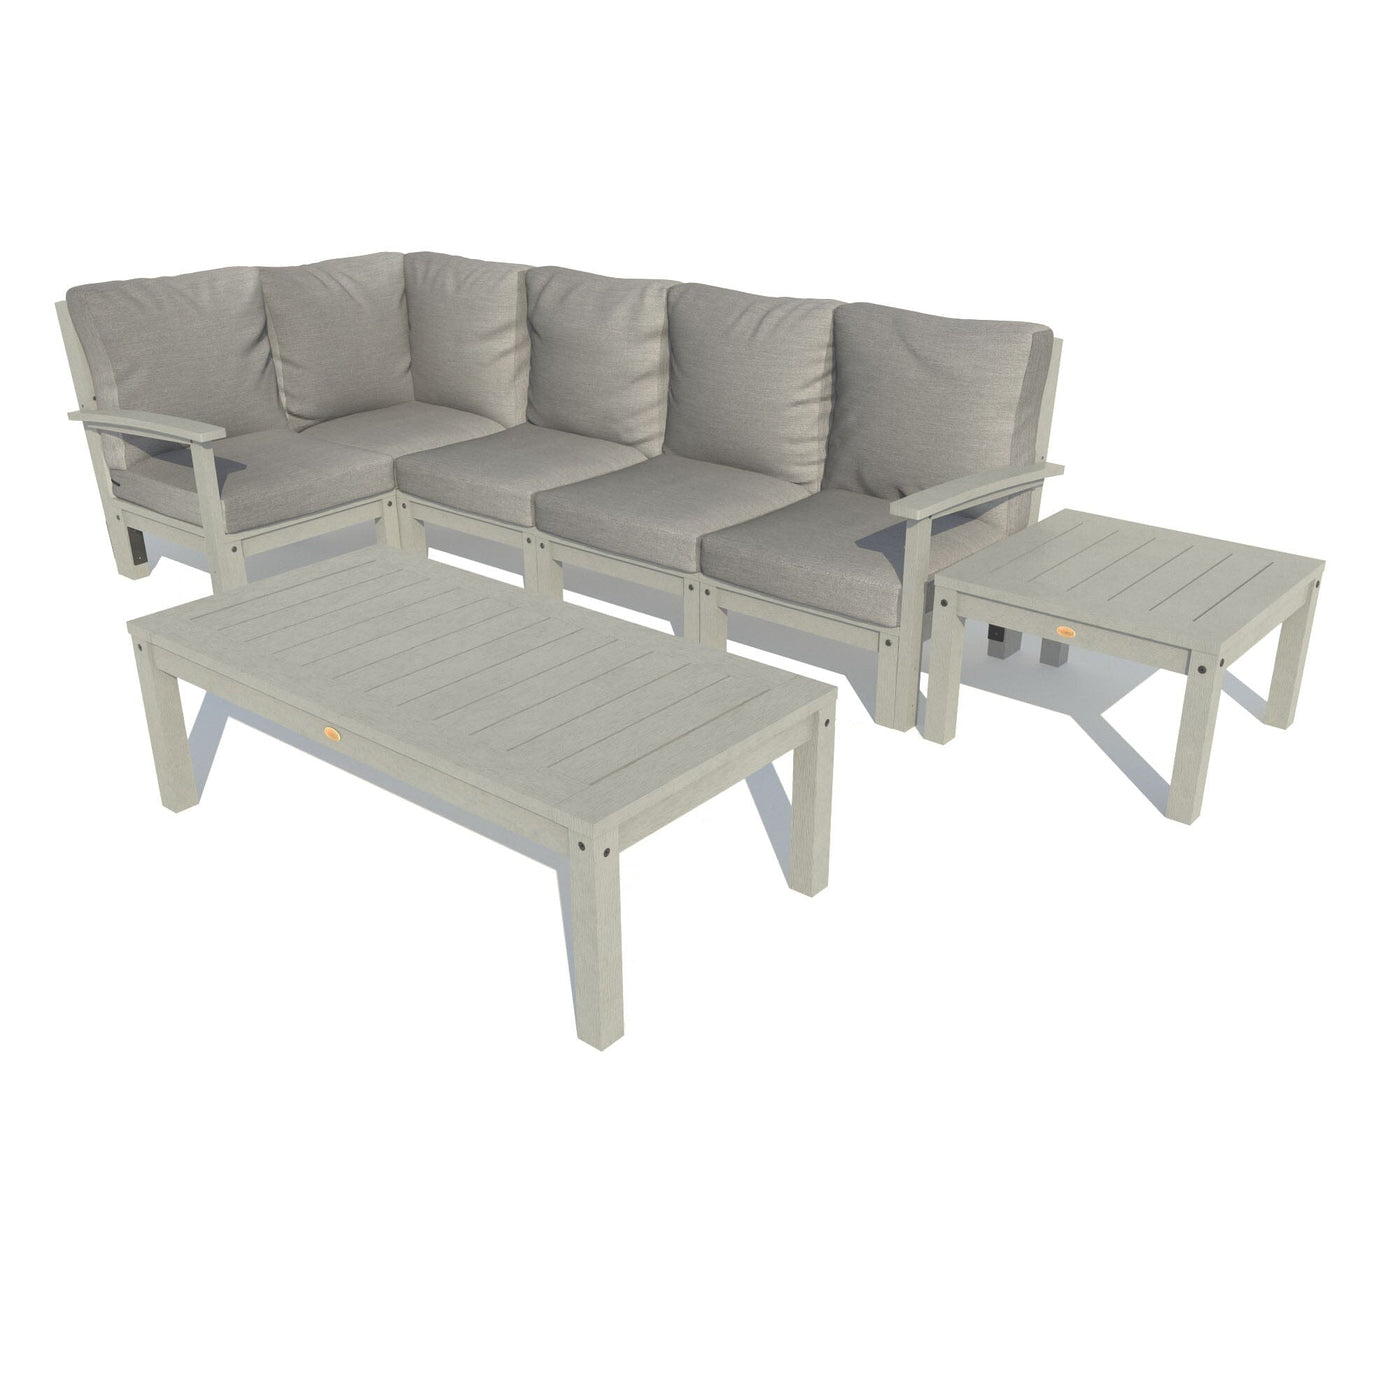 Bespoke Deep Seating: 7 Piece Sectional Set with Conversation and Side Table Deep Seating Highwood USA Stone Gray Coastal Teak 